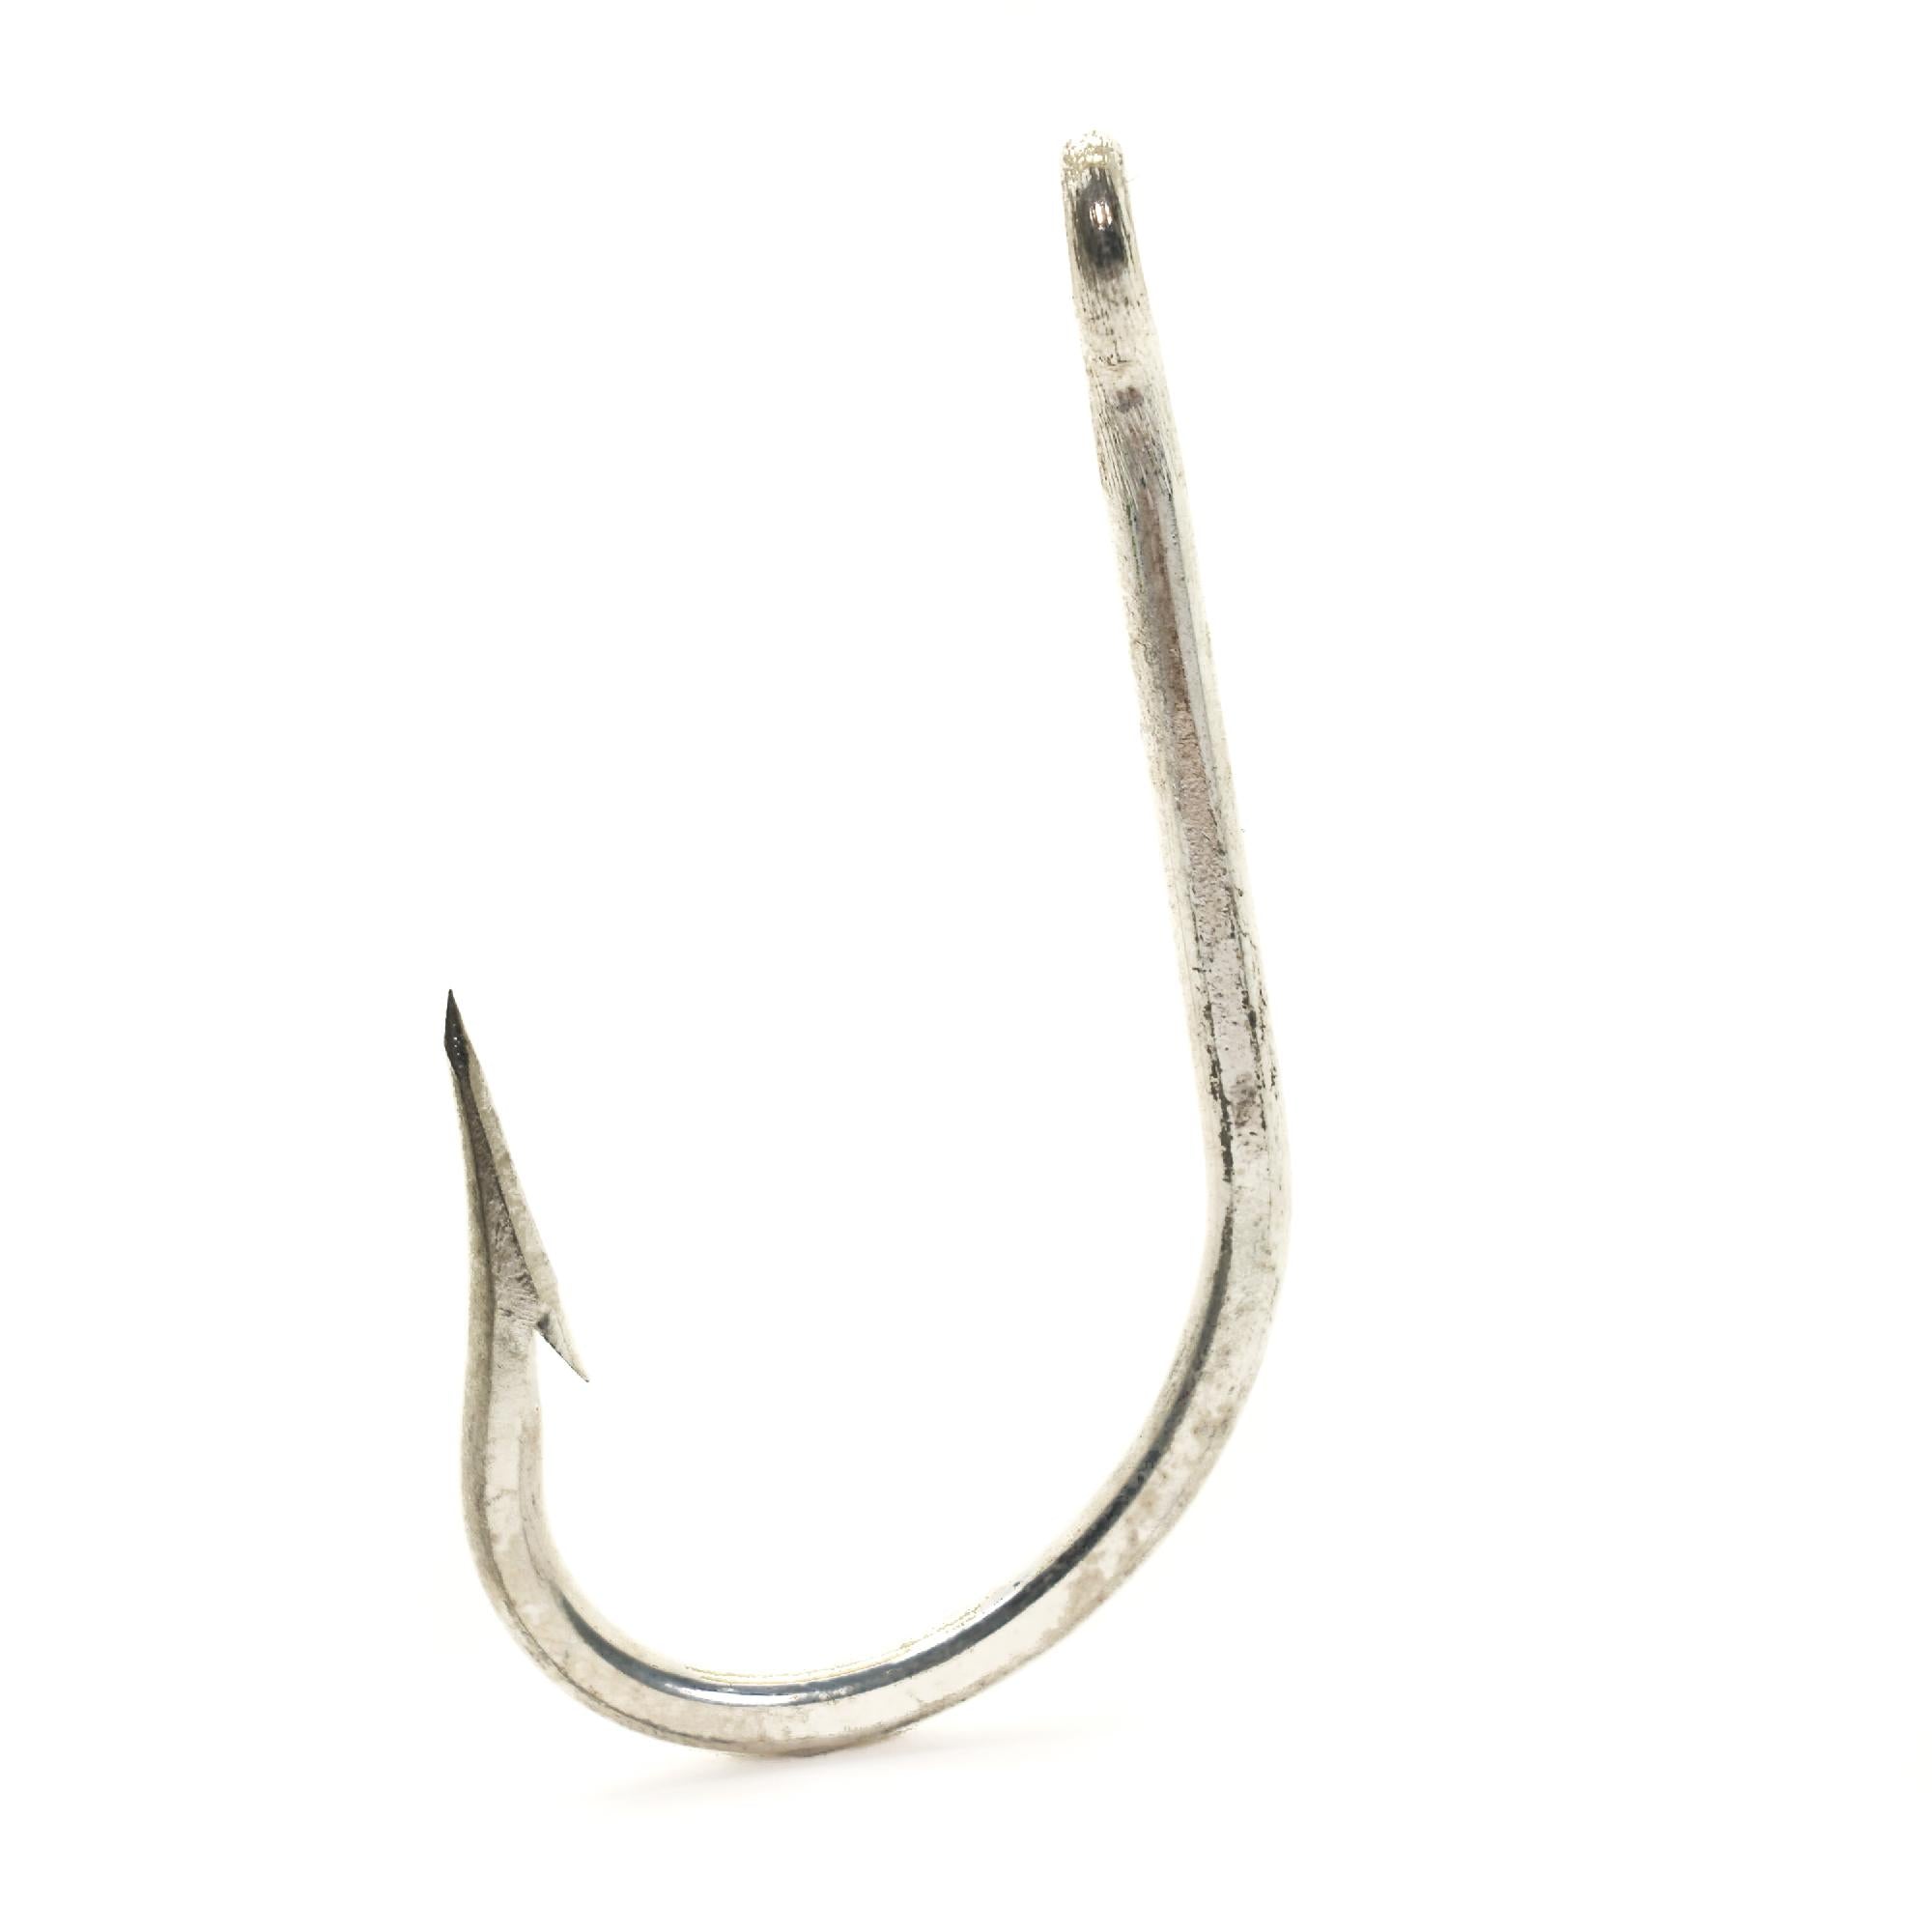 MUSTAD BIG GAME #3,8/0? ROUND BENT SEA HOOKS RINGED TINNED 3X LONG STRONG  2344 B